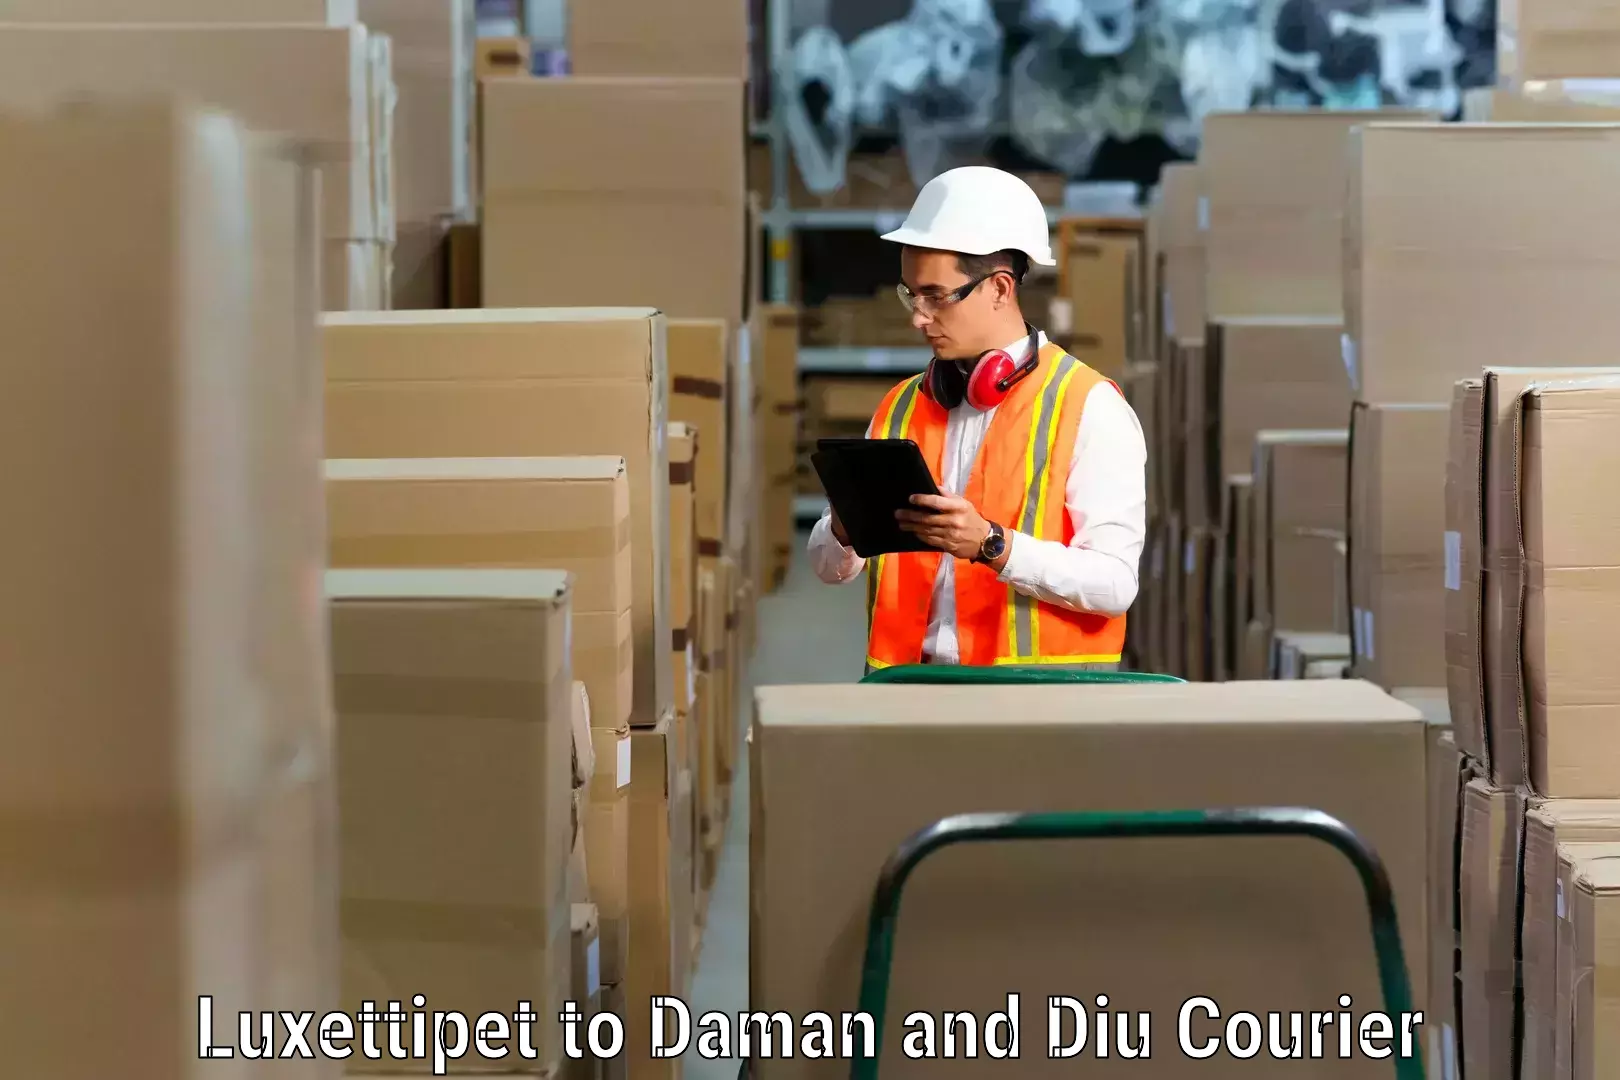 Professional moving company Luxettipet to Diu